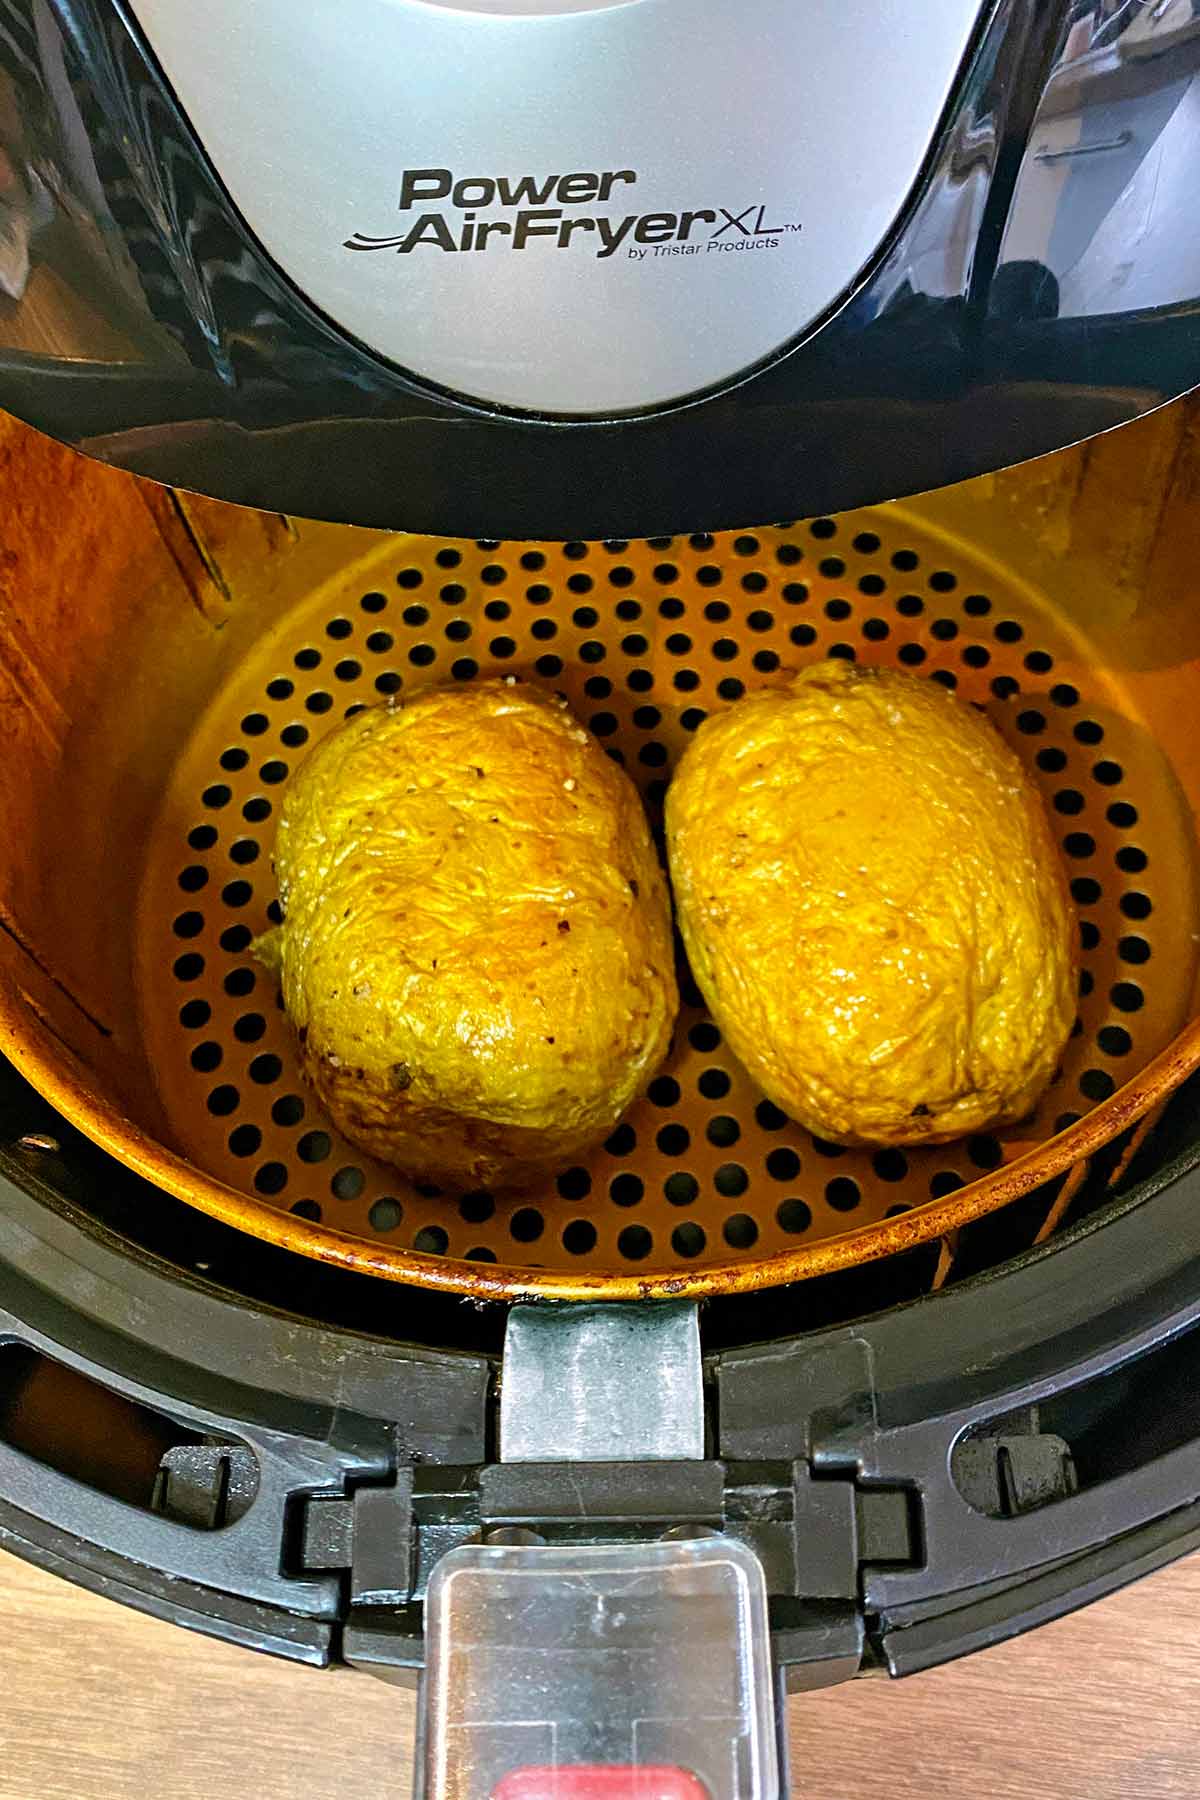 Two cooked potatoes in an air fryer.